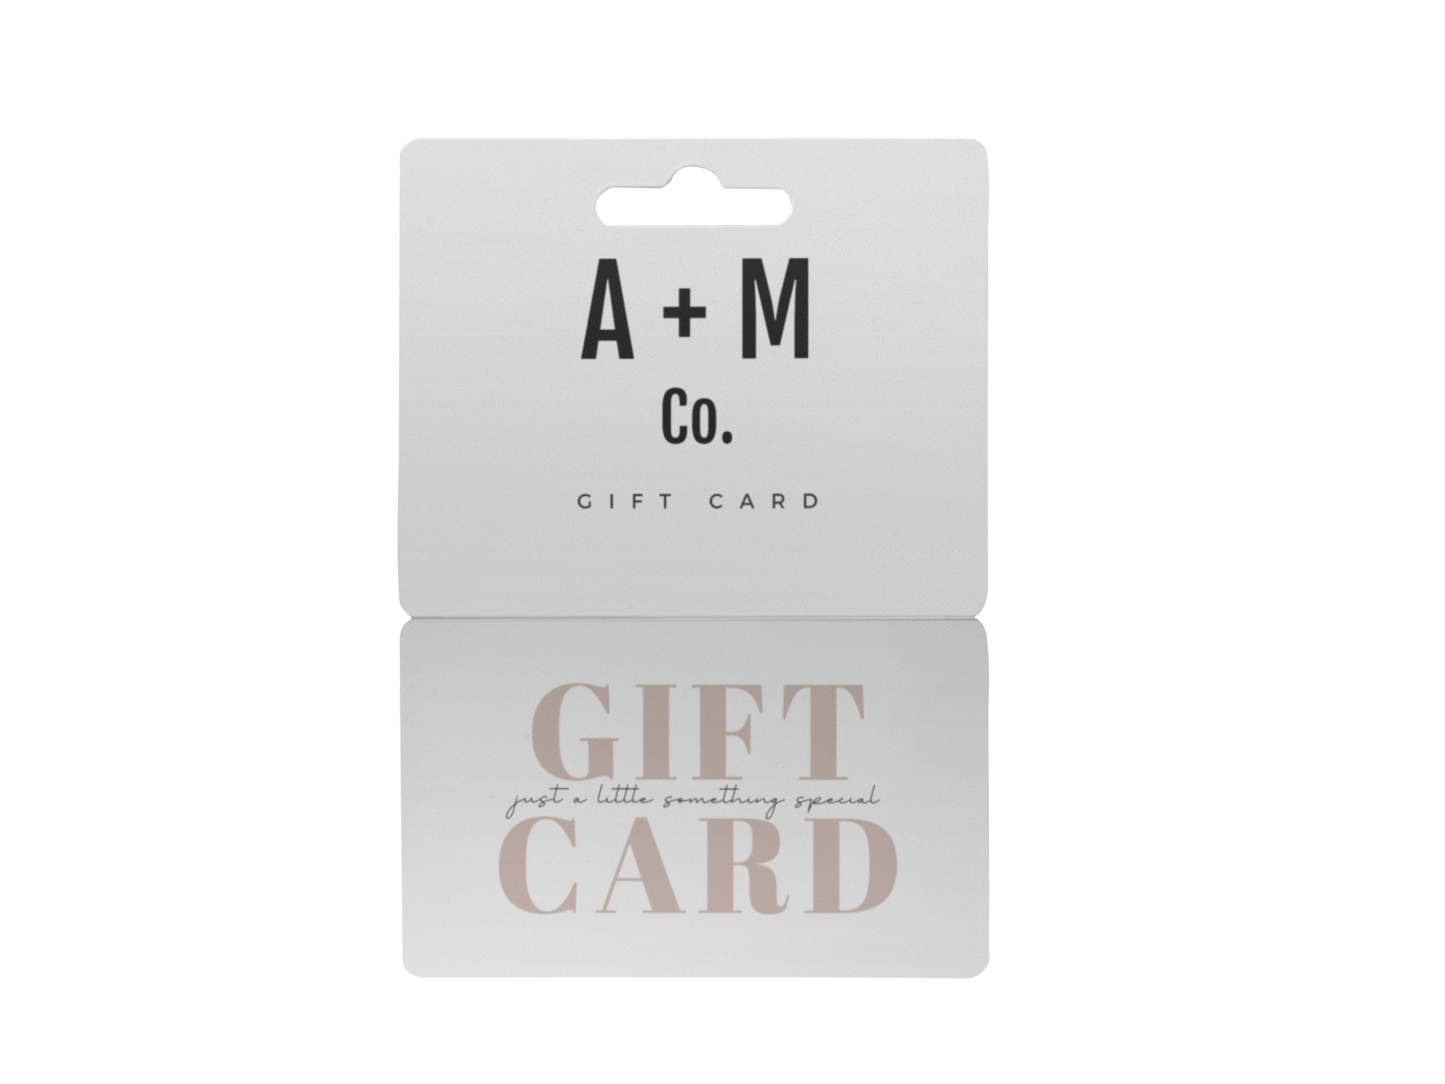 A + M Co. Gift Card